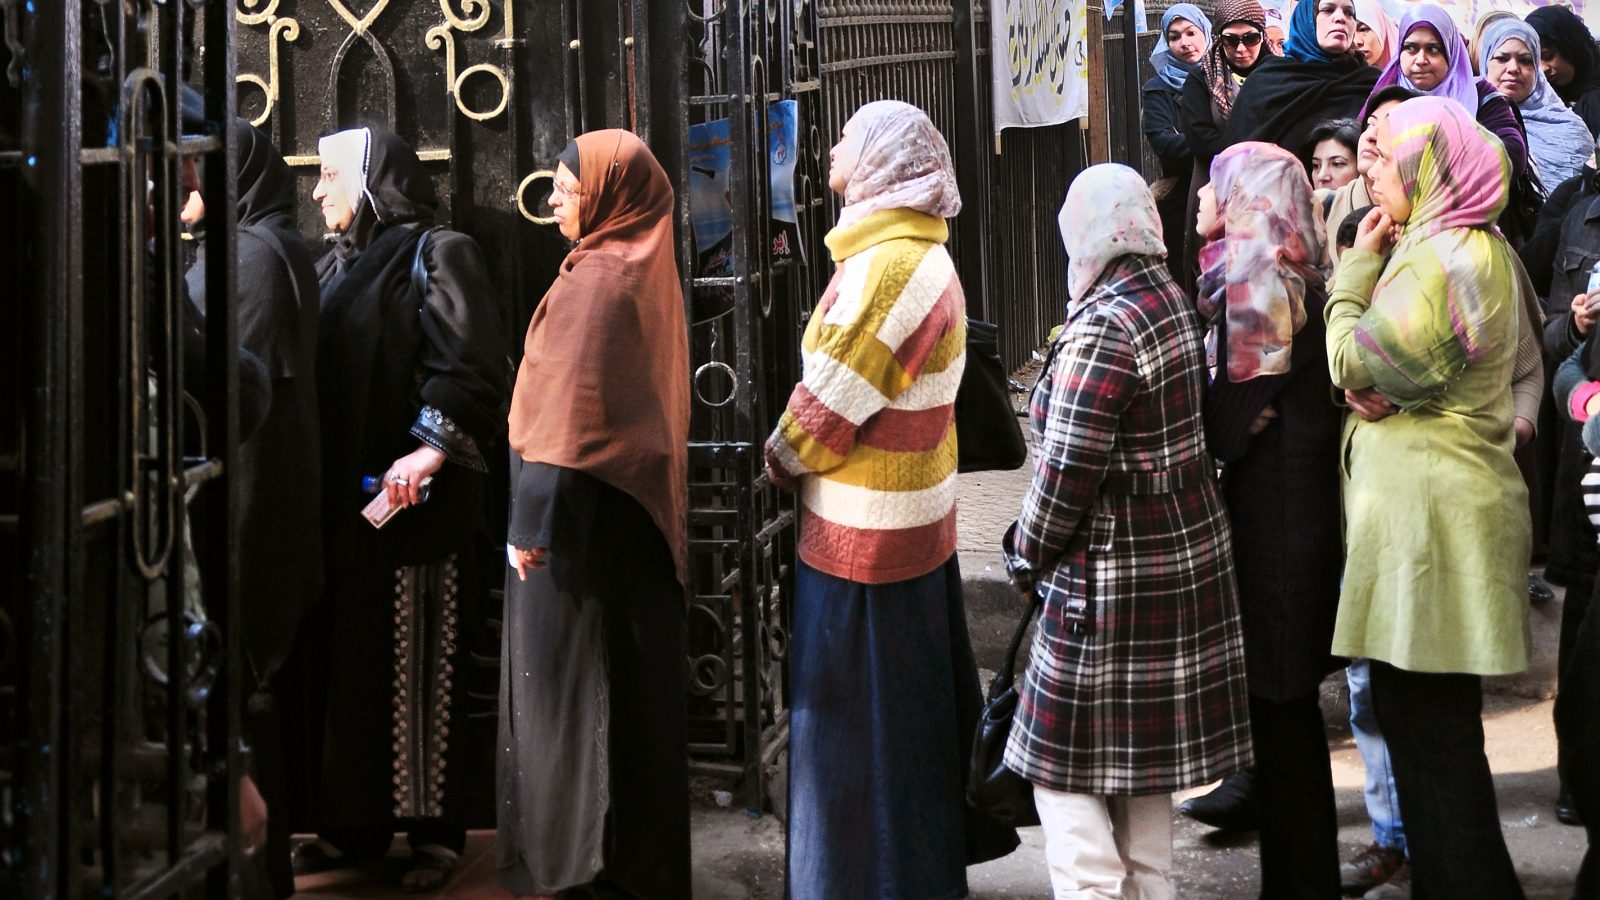 Egyptian women line up to vote in parliamentary elections. Many women ran as candidates in 2011-2012, yet just nine were elected and two appointed.